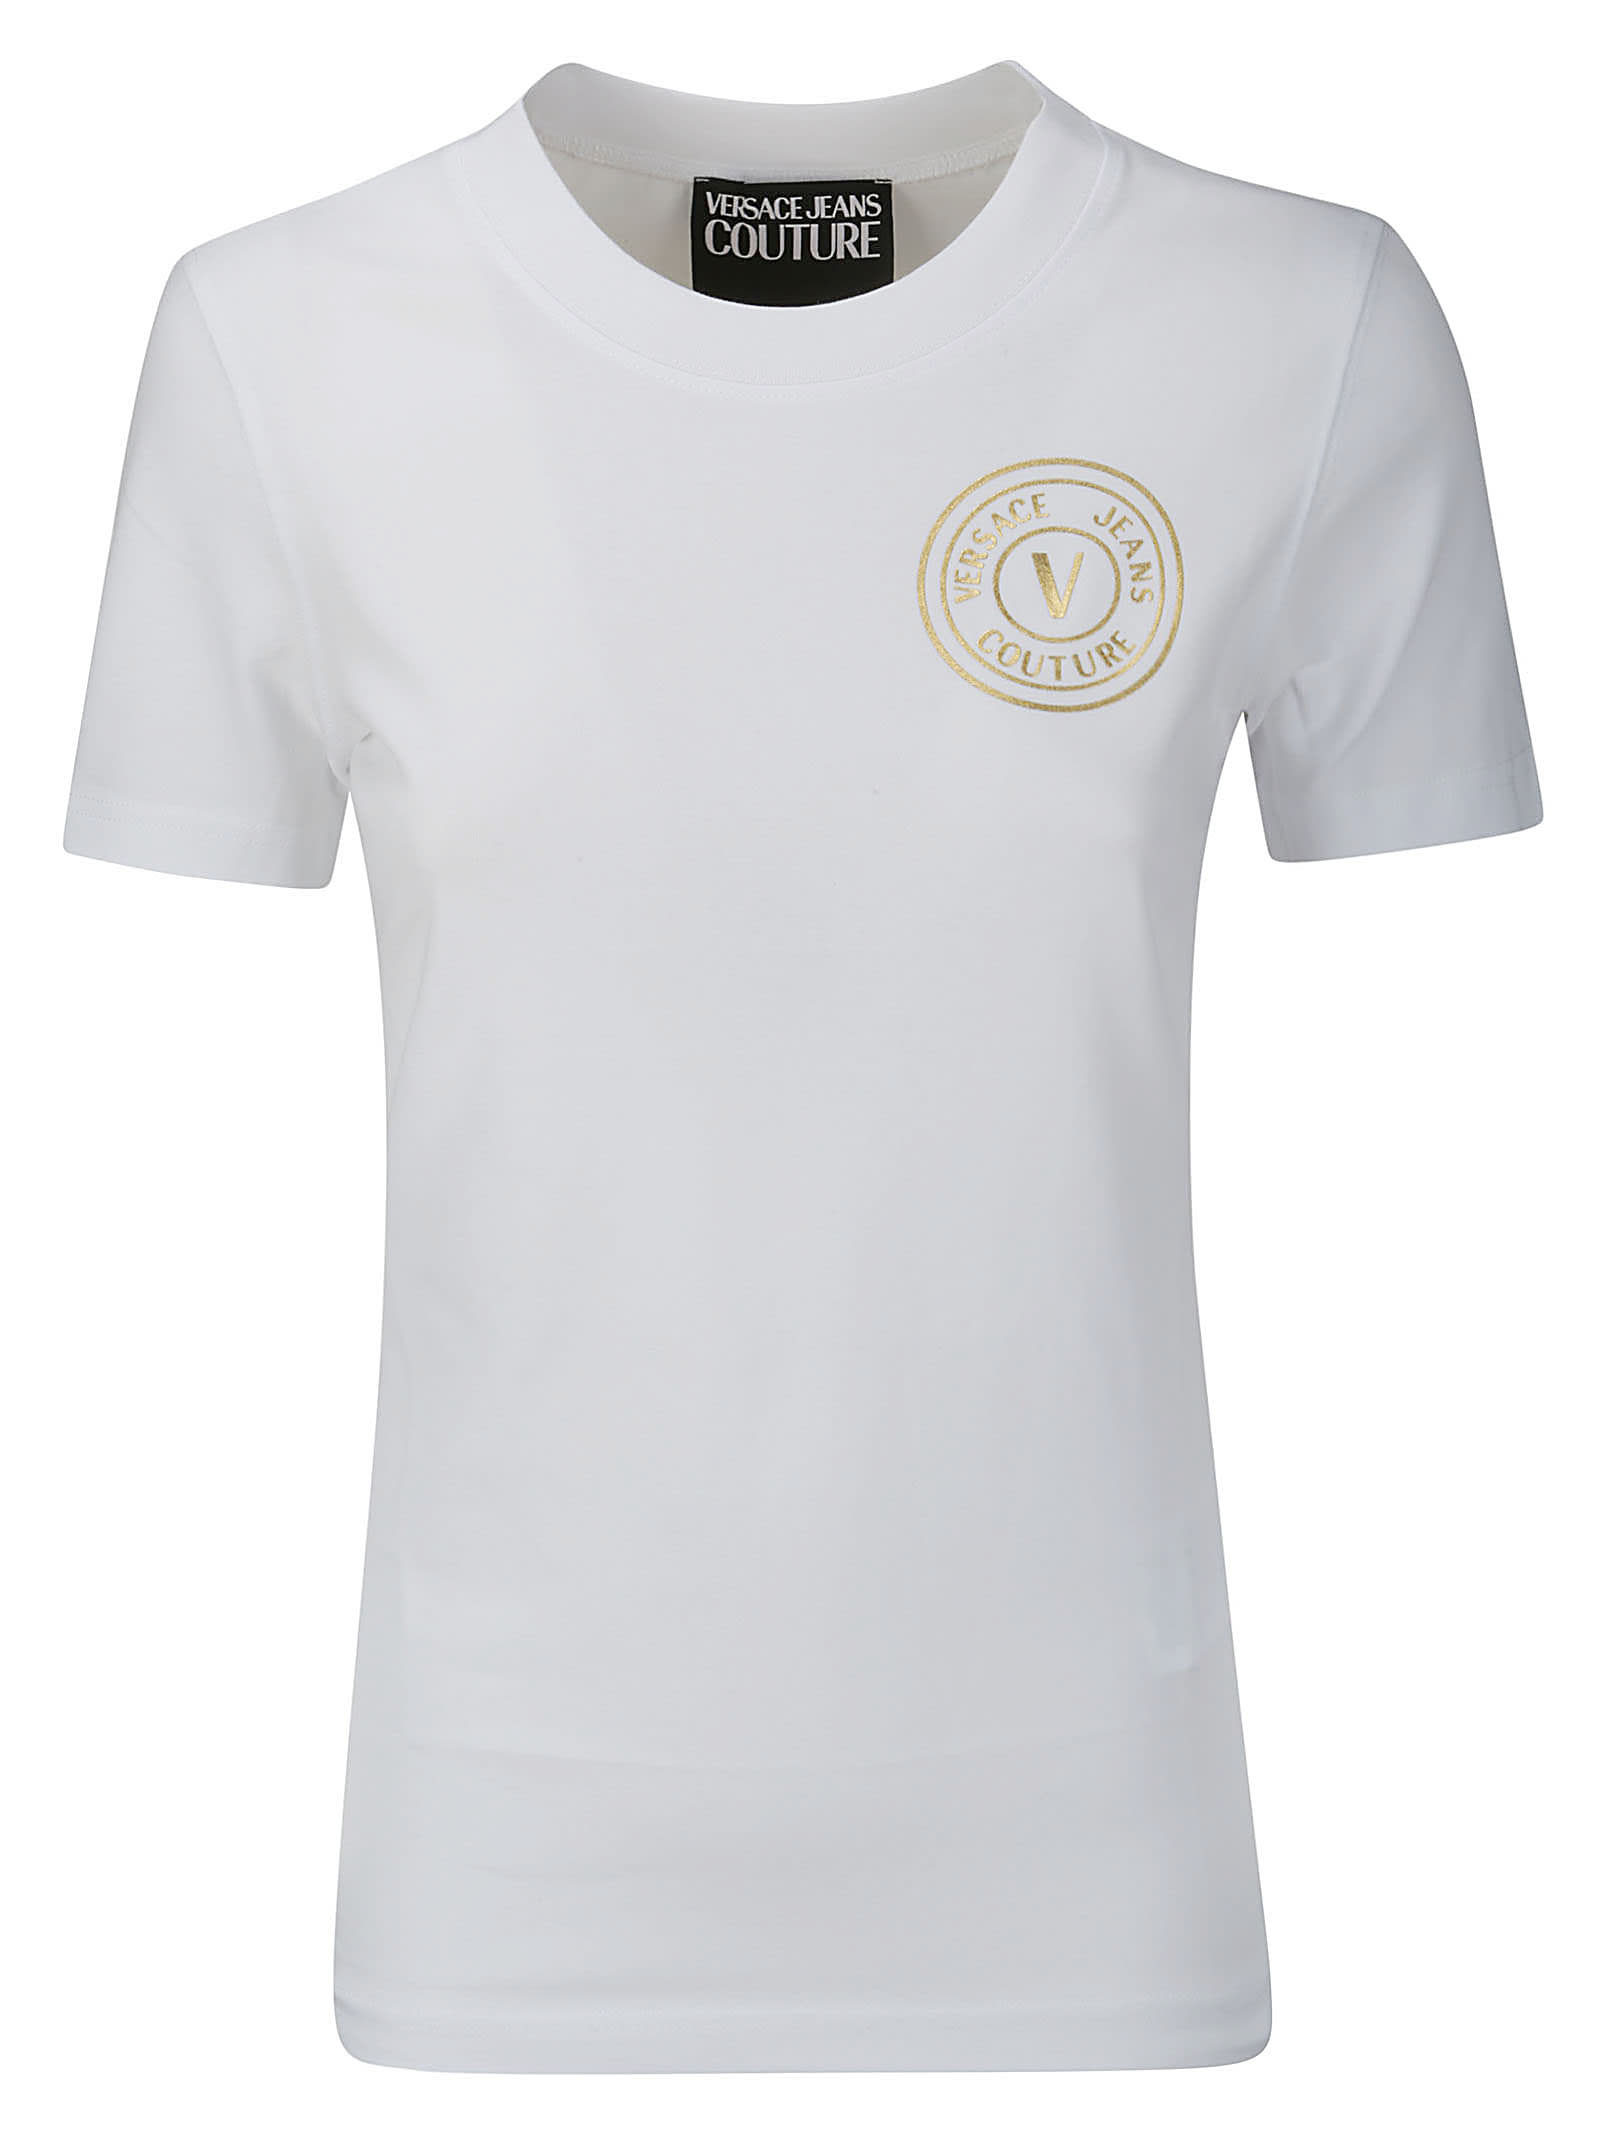 Versace Jeans Couture 76dp608 S S Vembl S Thick Foil T-shirt In White/gold